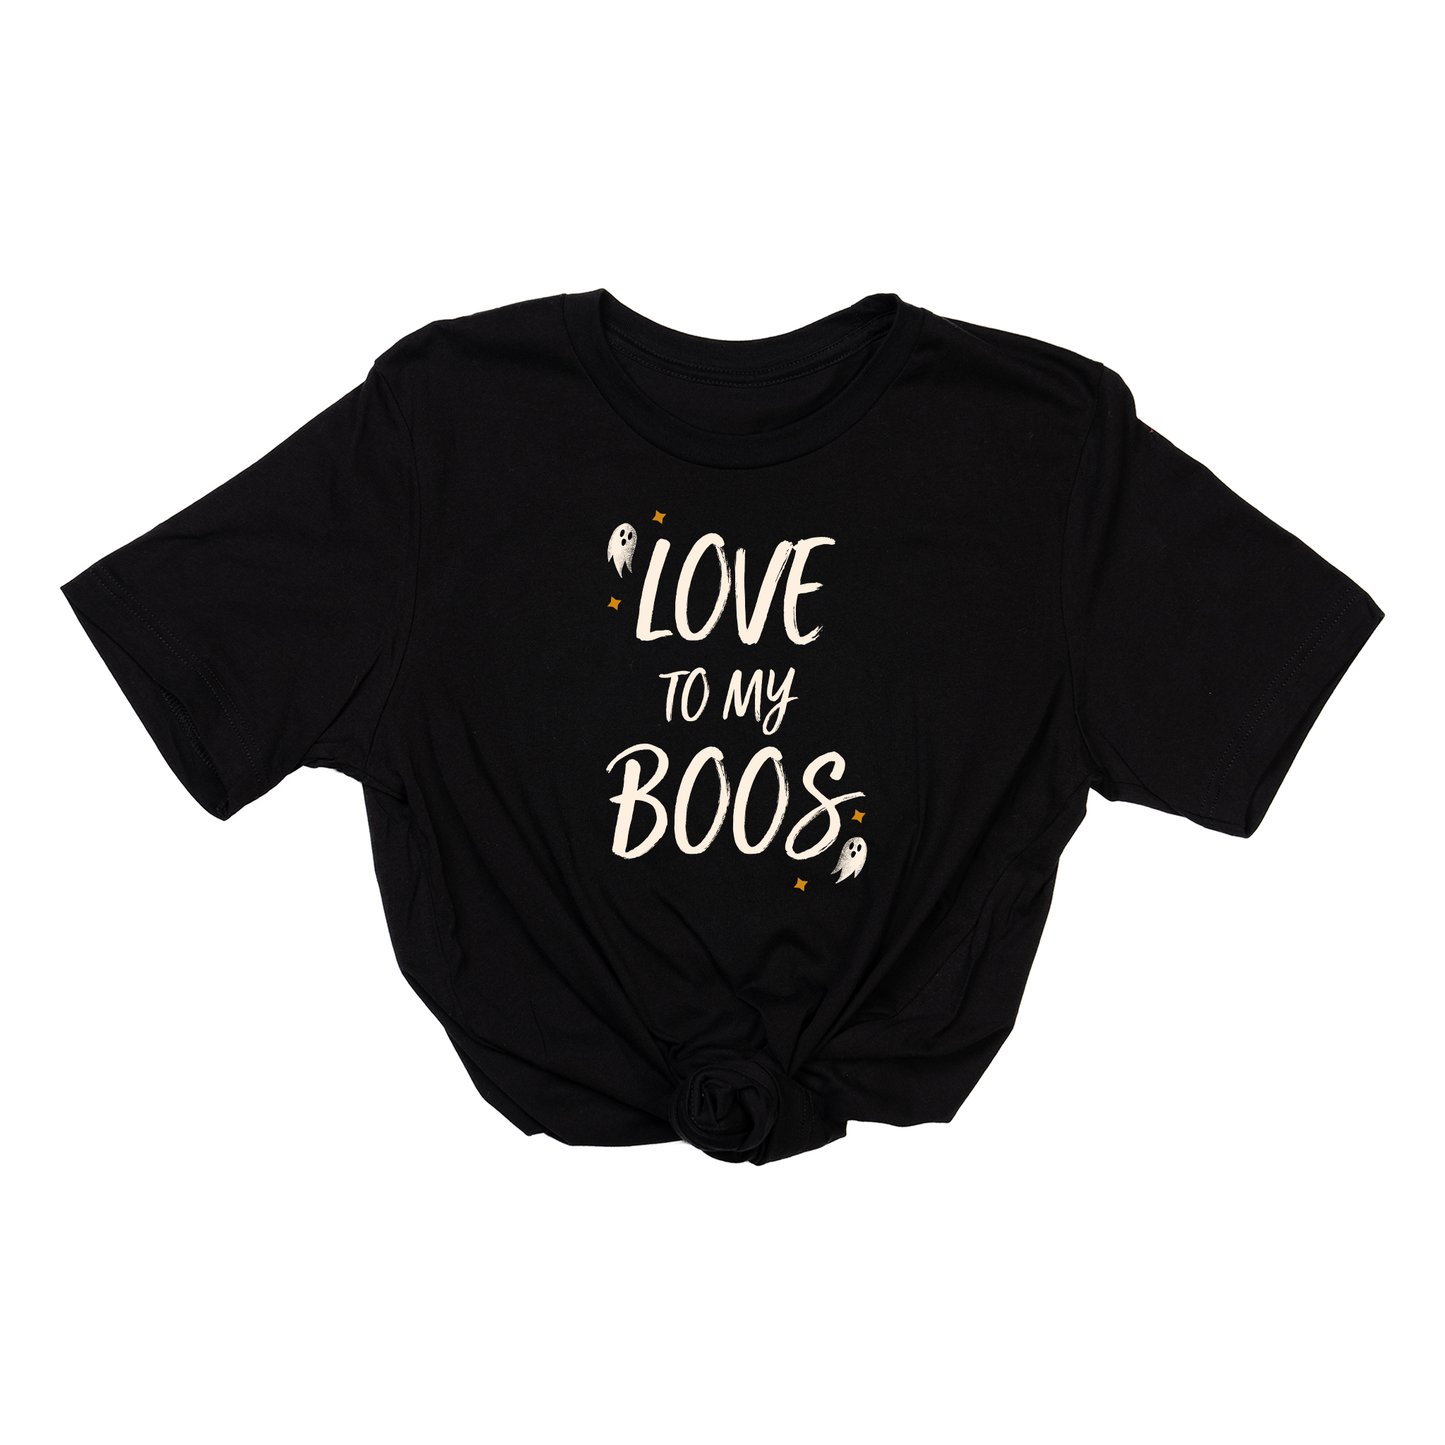 LOVE to my BOOS (Off White) - Tee (Black)